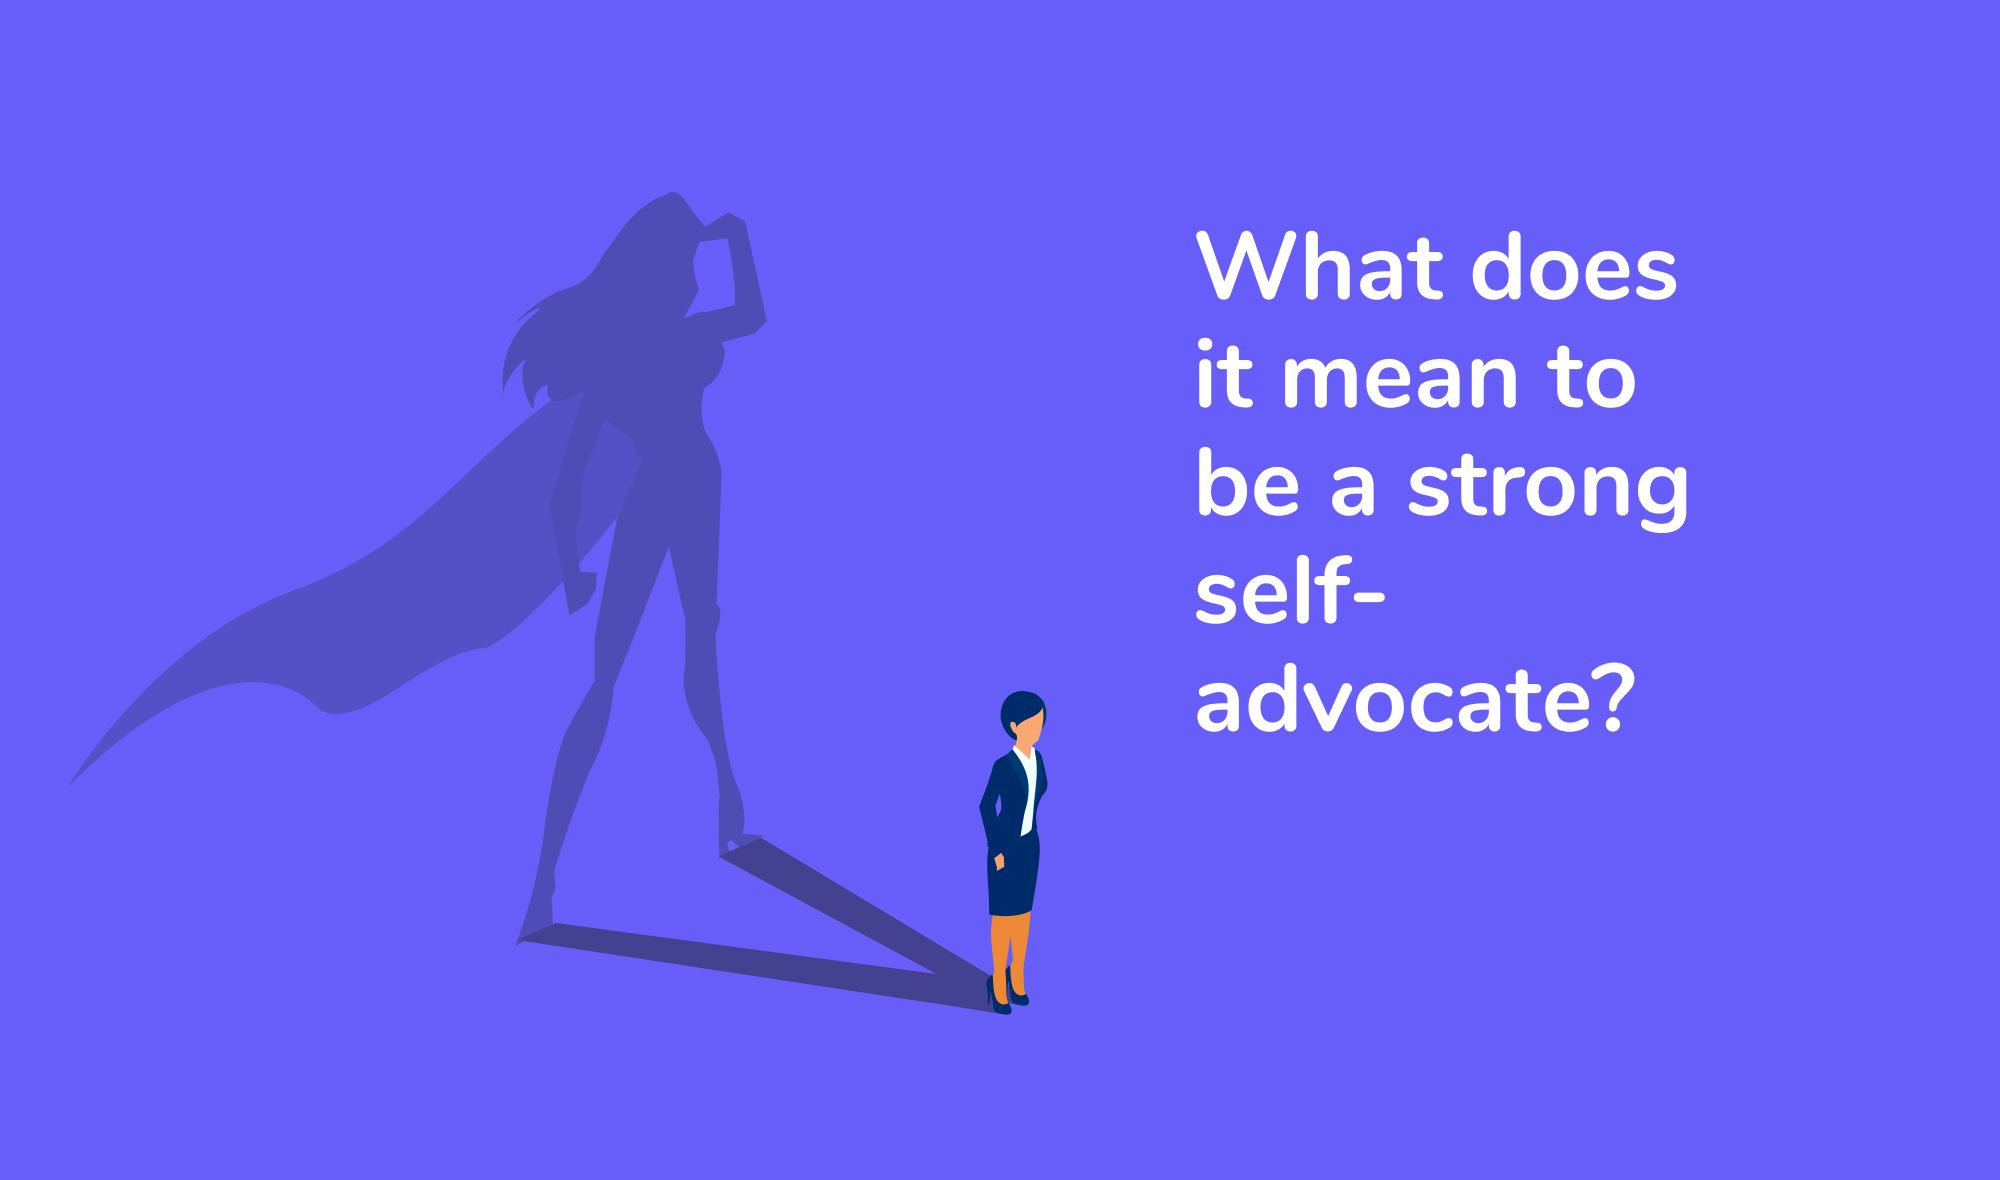 What does it mean to be a strong self-advocate?